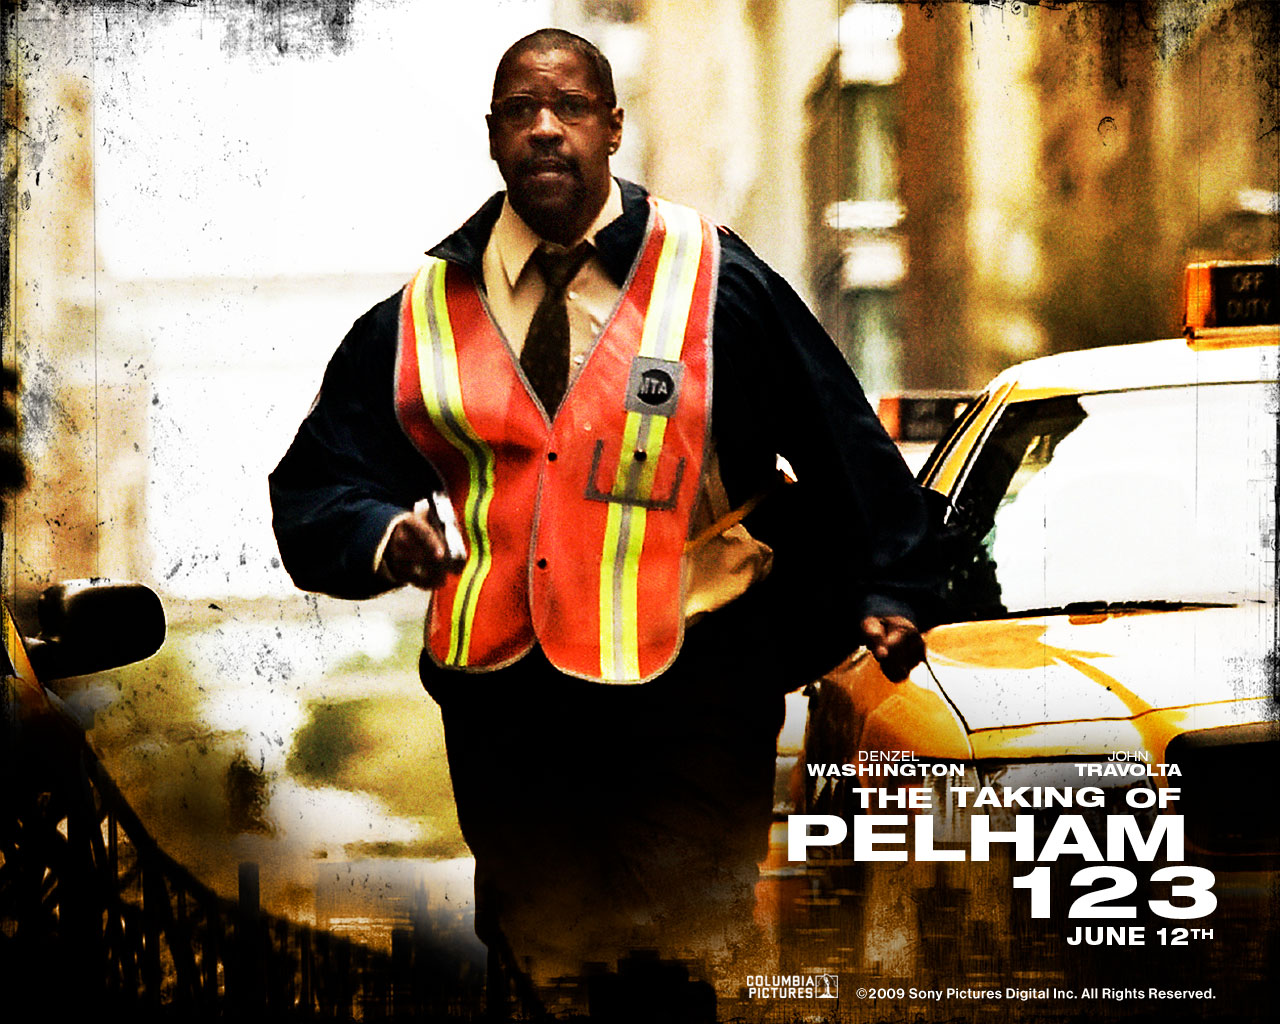 Download full size The Taking of Pelham 1 2 3 wallpaper / Movies / 1280x1024